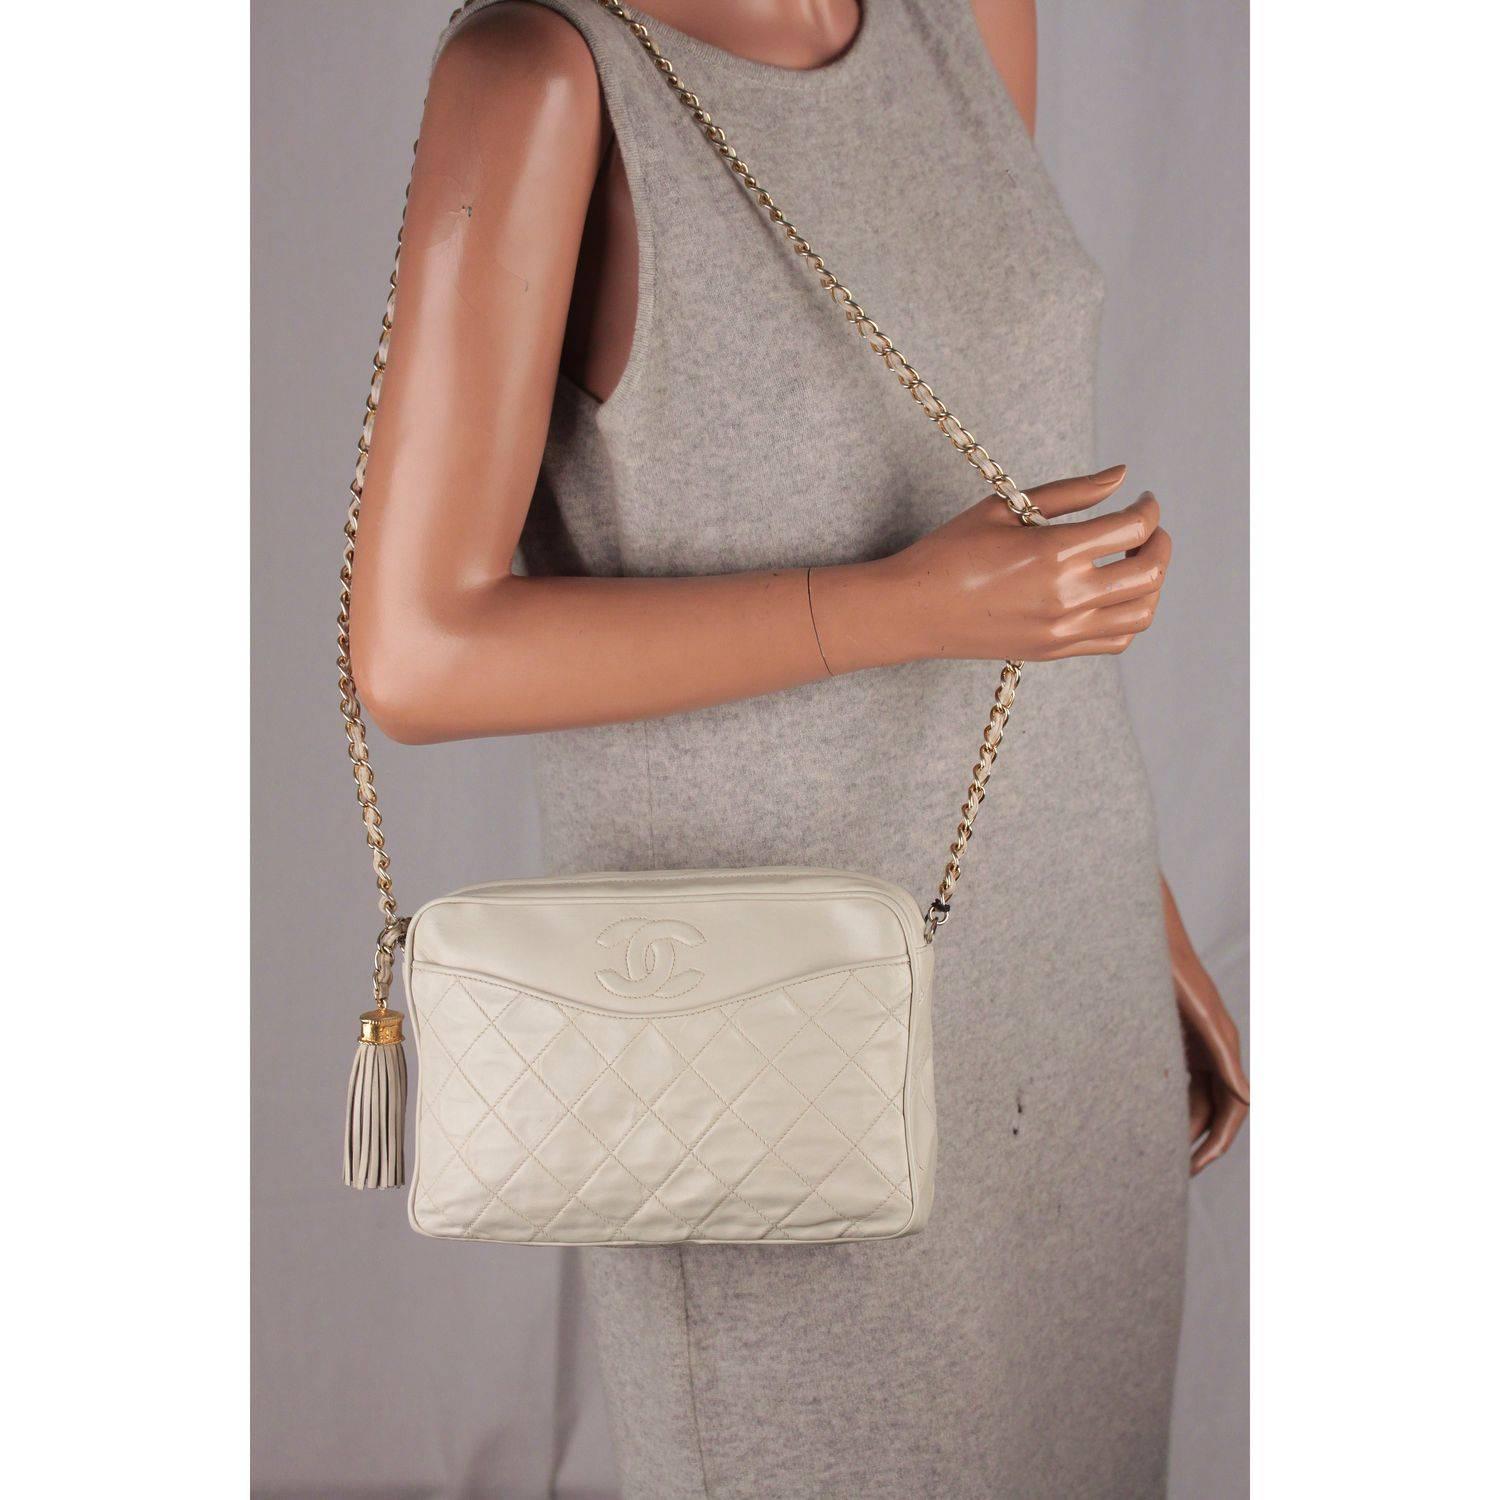 CHANEL Vintage Ivory QUILTED Leather CC Stitch CAMERA BAG w/ Tassel 2